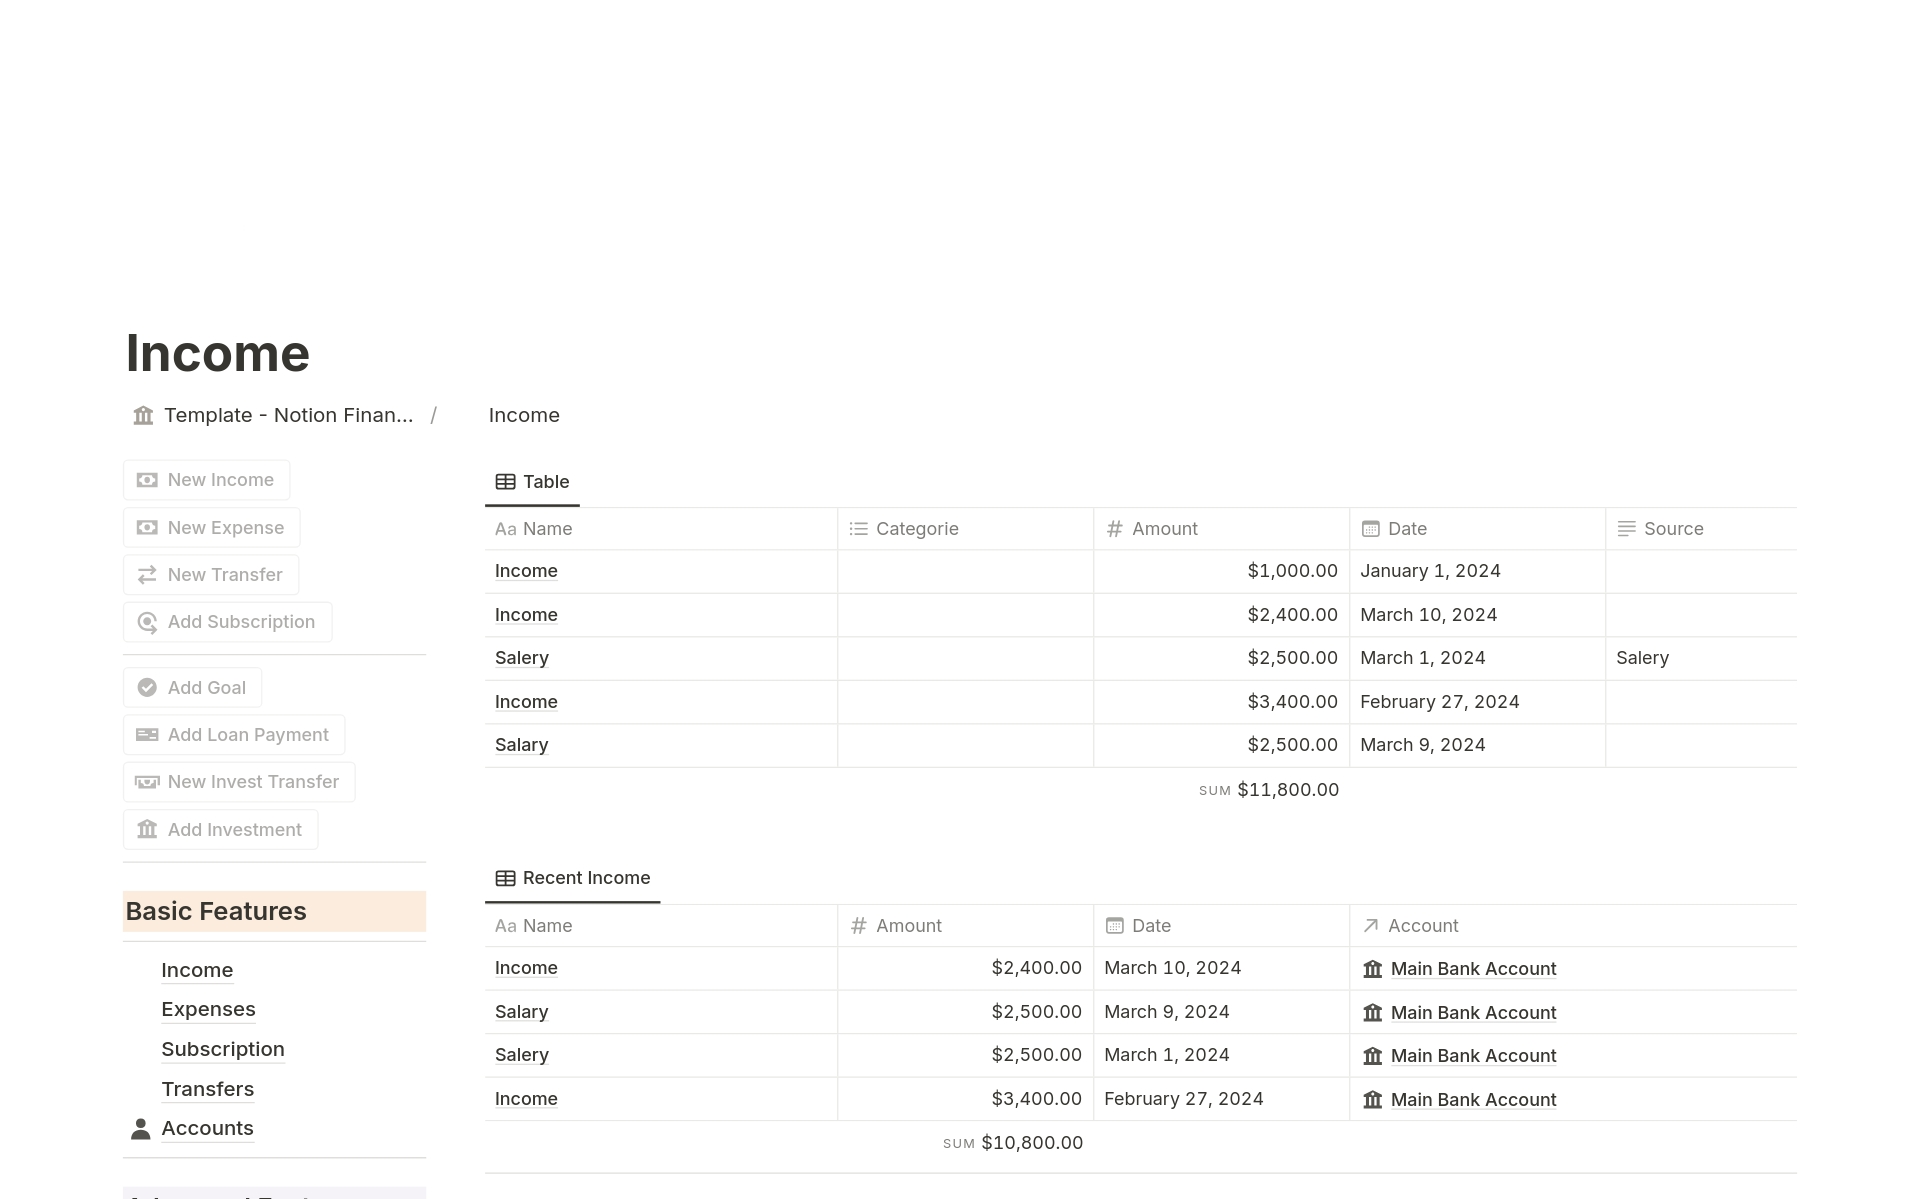 Discover our Finance OS Template: Your all-in-one tool for tracking income, expenses, debt management, and investments. Structured, clear, and customizable for financial freedom. Use "Notion10" on Gumroad for 10% Off. 